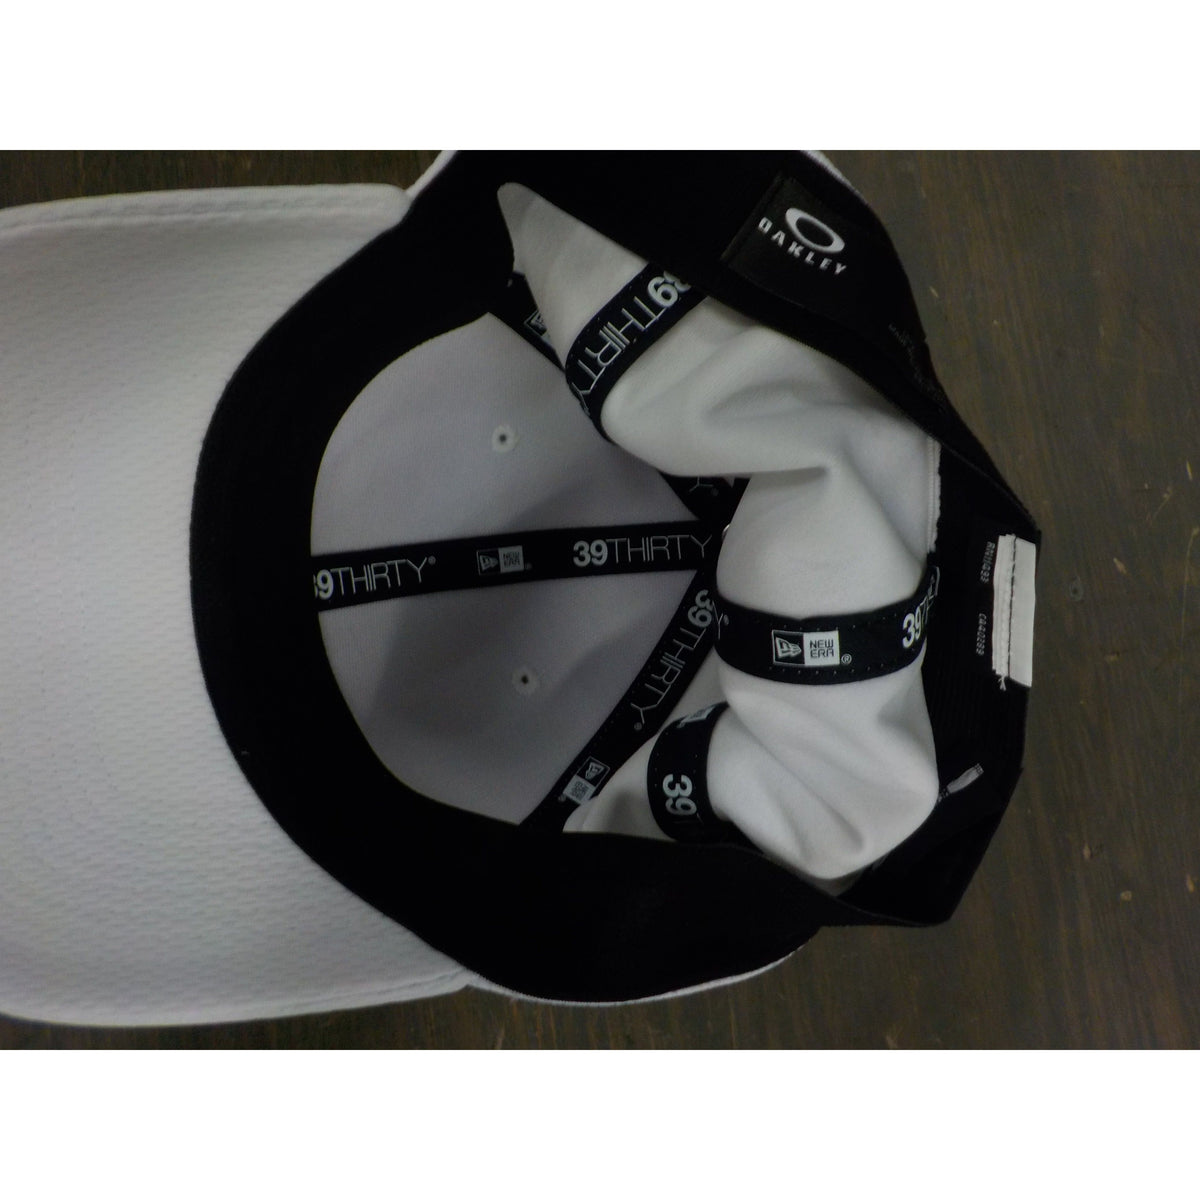 Oakley Tinfoil Cap 2.0 - White - Large/X-Large - Used - Acceptable